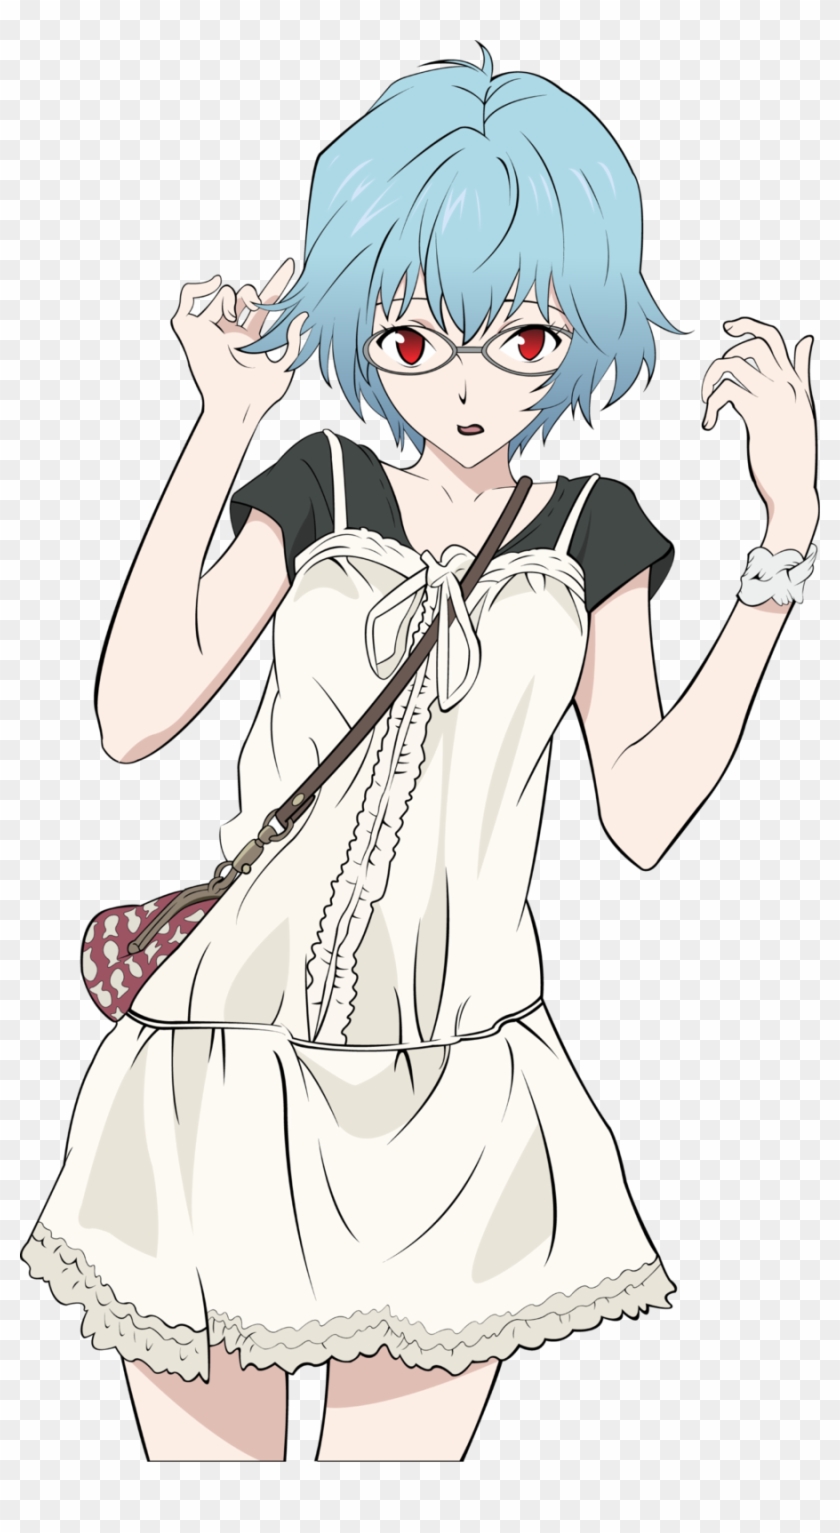 Rei Ayanami Vector By Megadud20 - Rei Ayanami With Glasses #945438